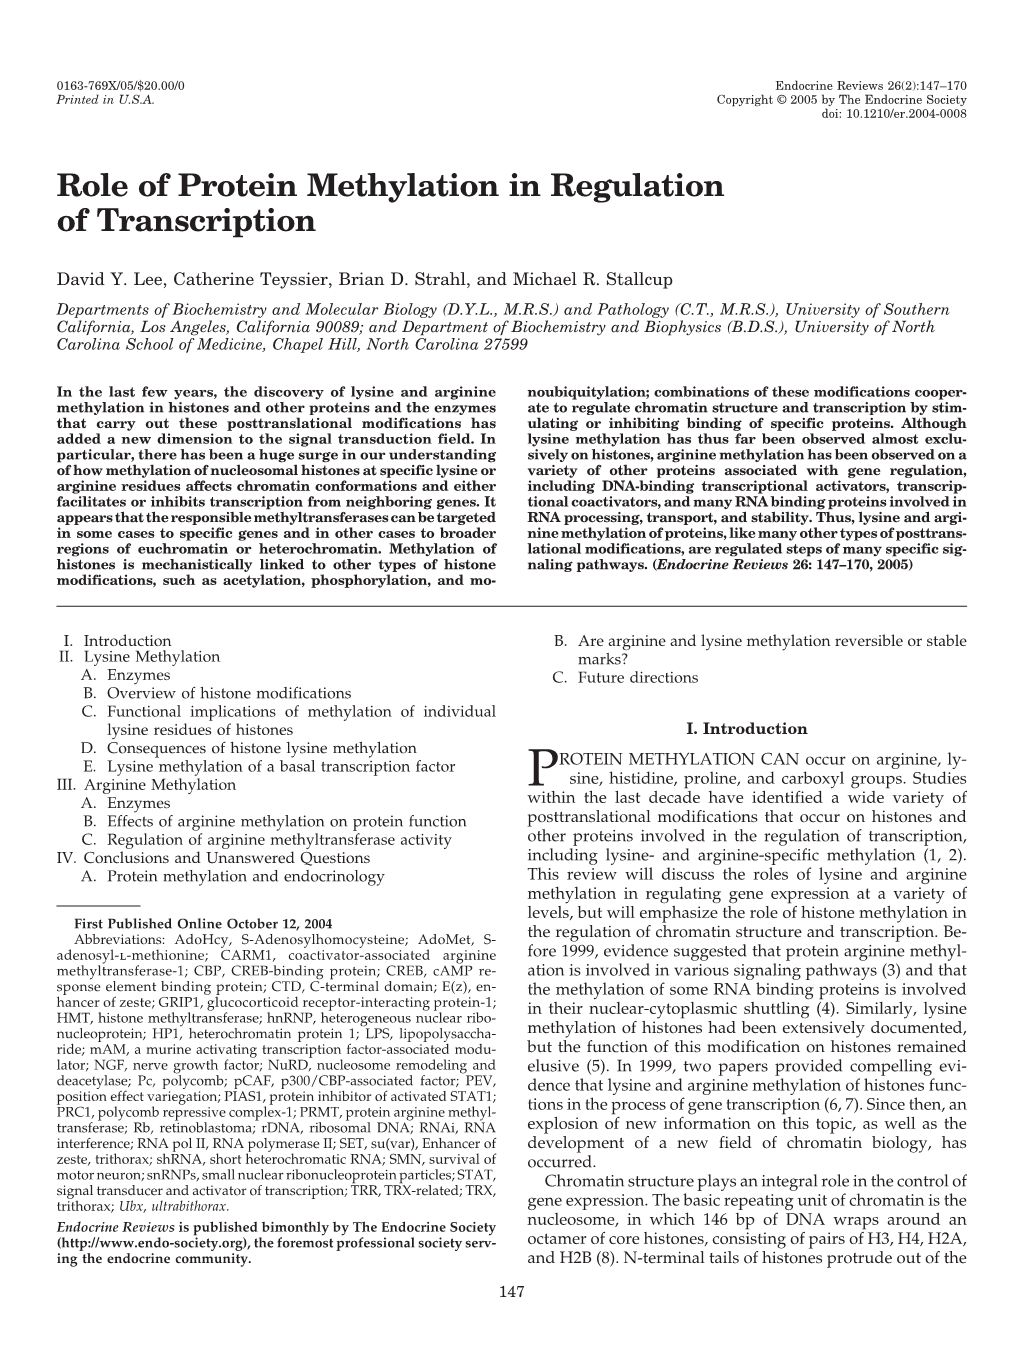 Role of Protein Methylation in Regulation of Transcription